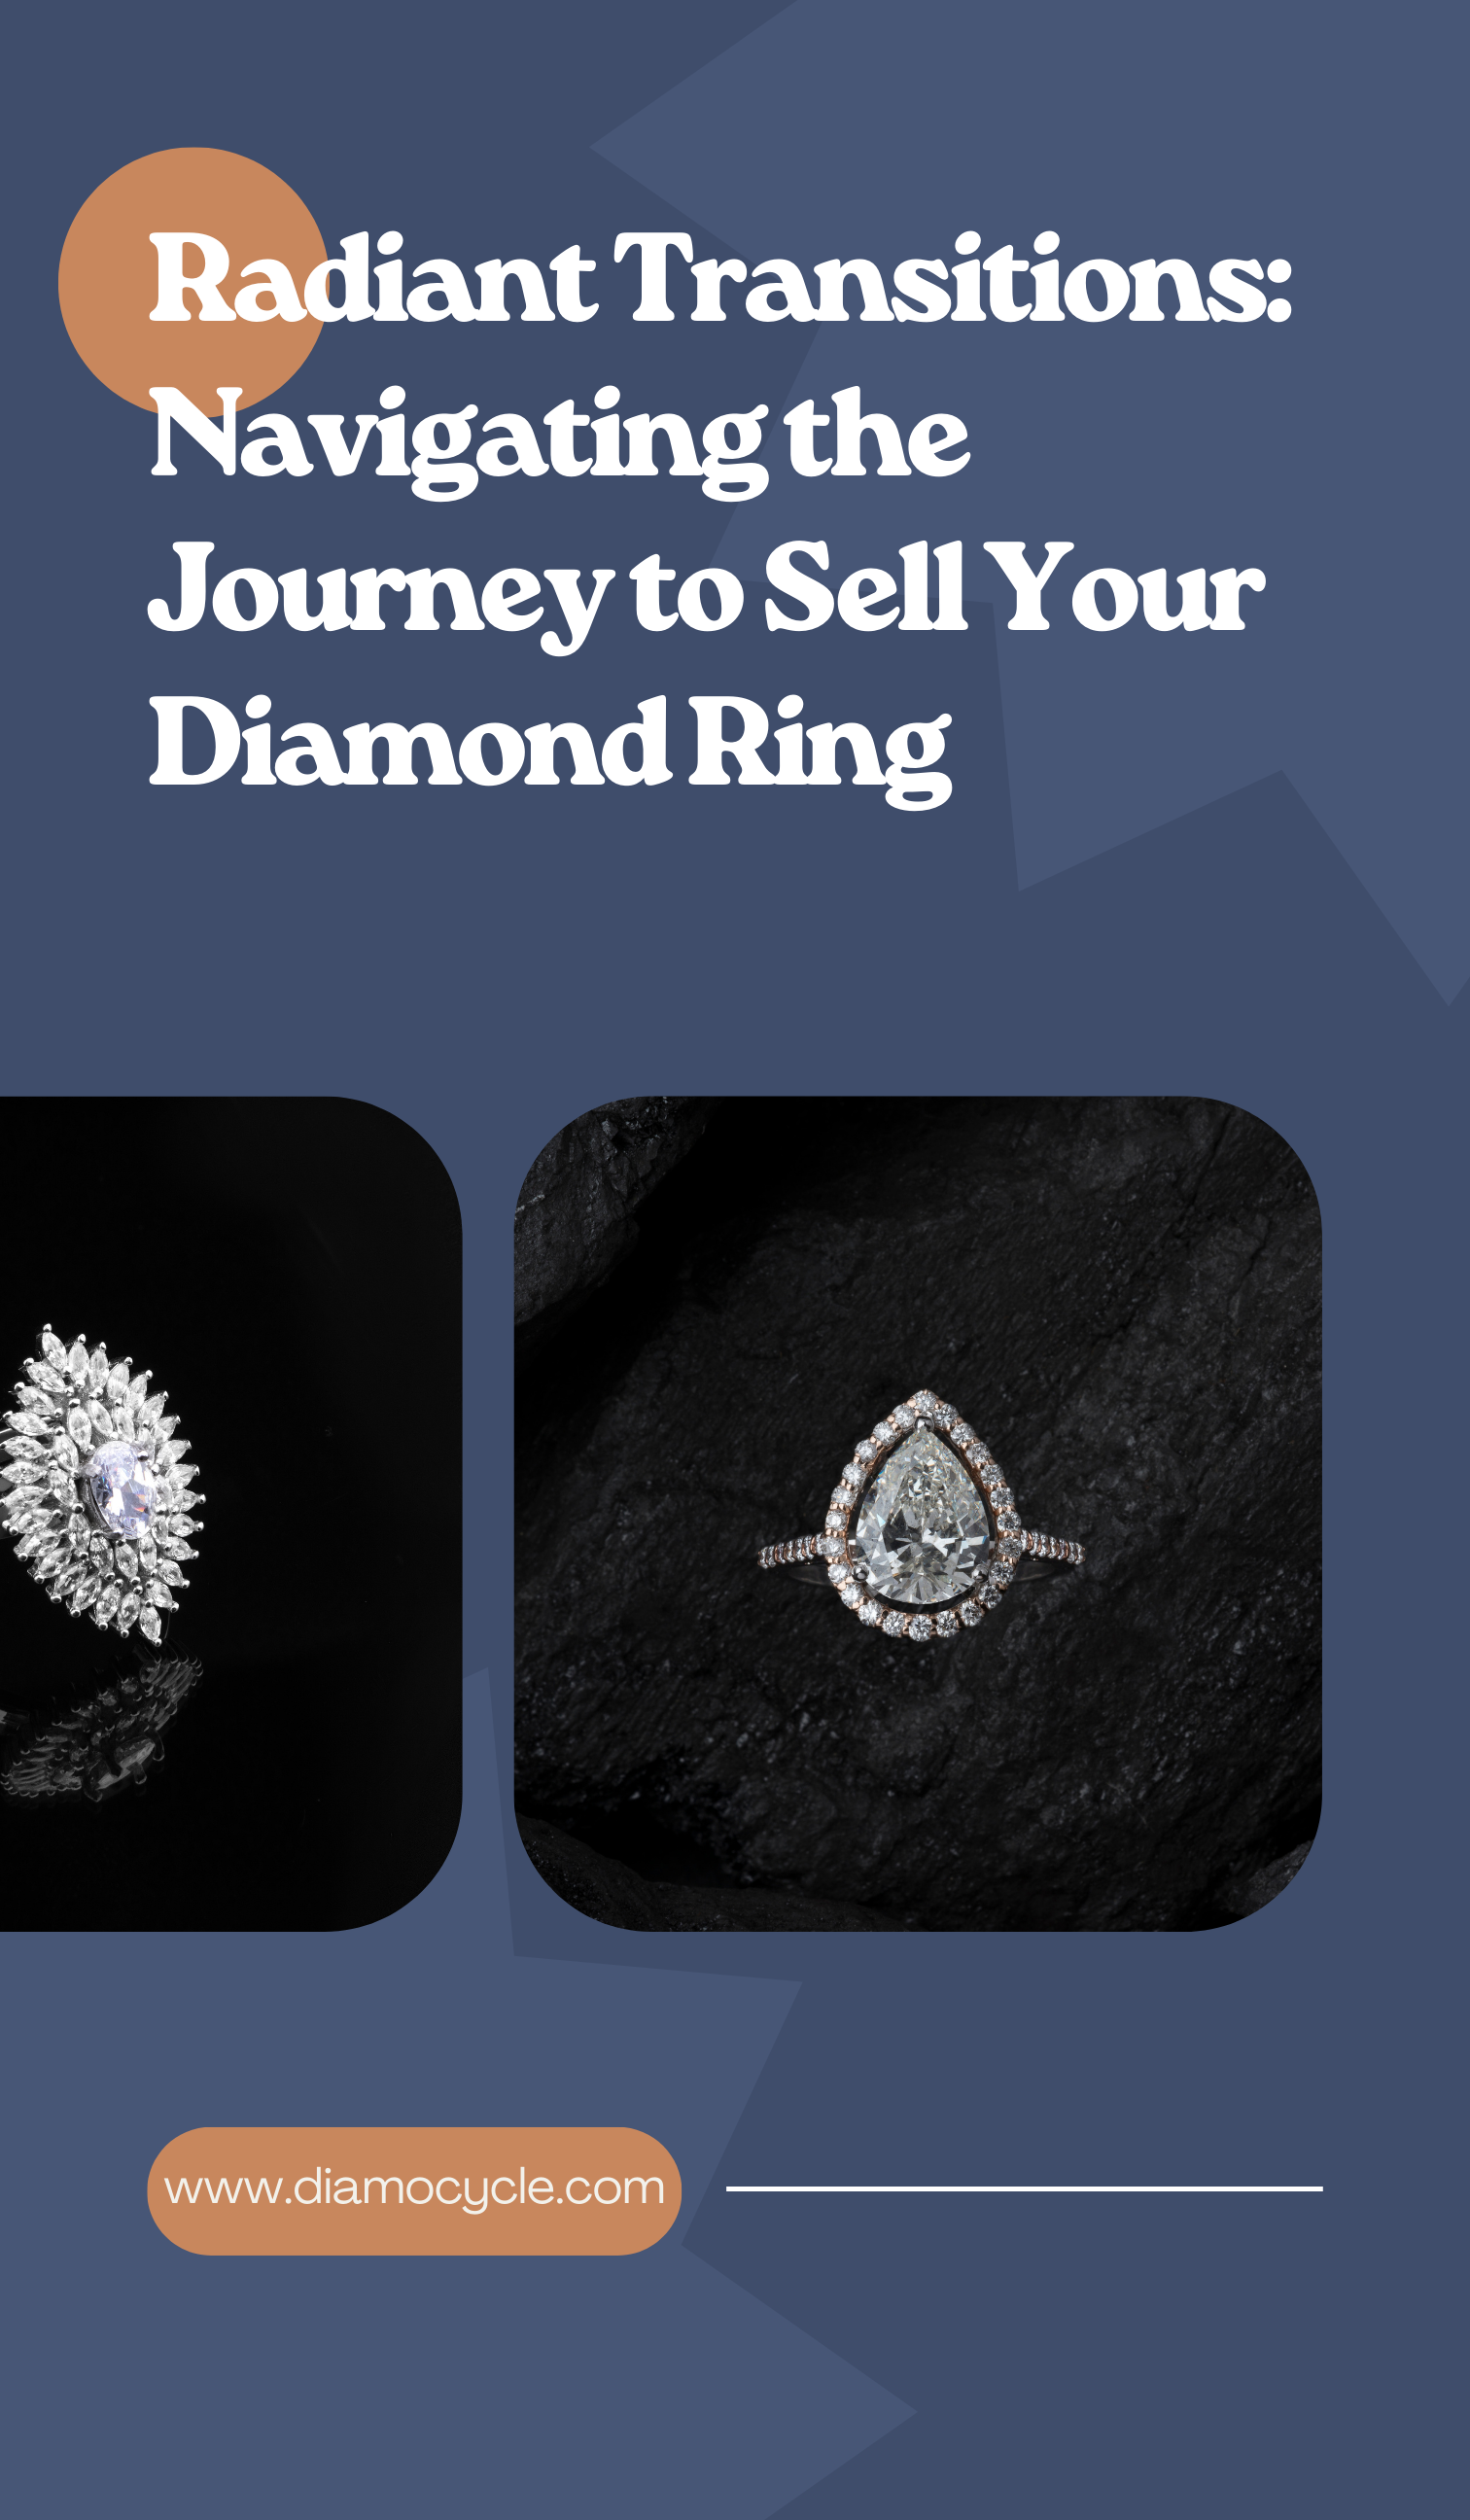 Radiant Transitions: Navigating the Journey to Sell Your Diamond Ring